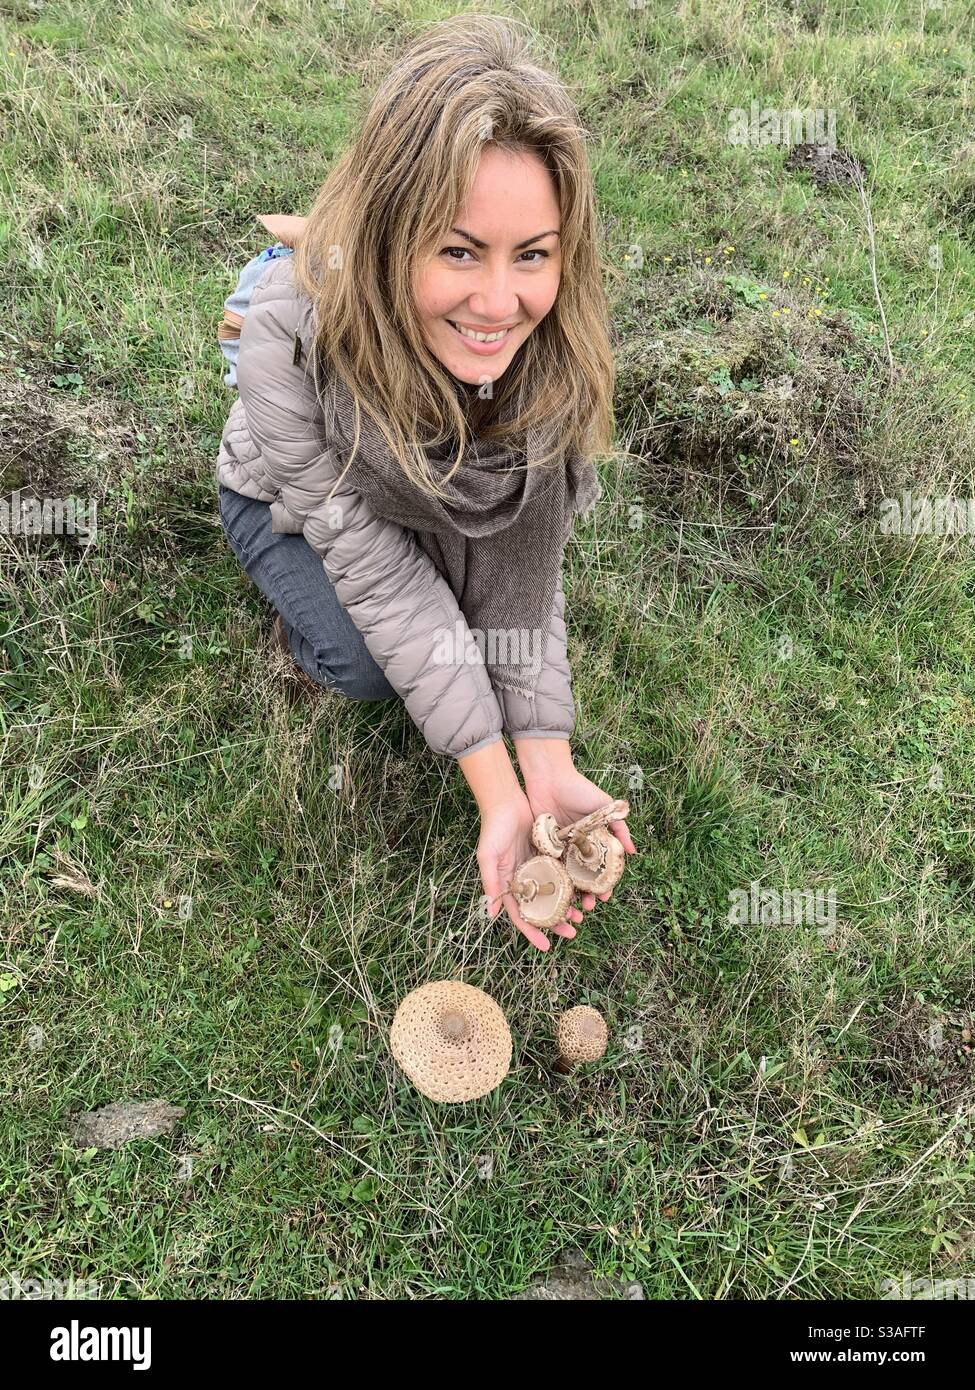 Woman holding shaggy parasol mushroom pickings in Staines moor Stock Photo